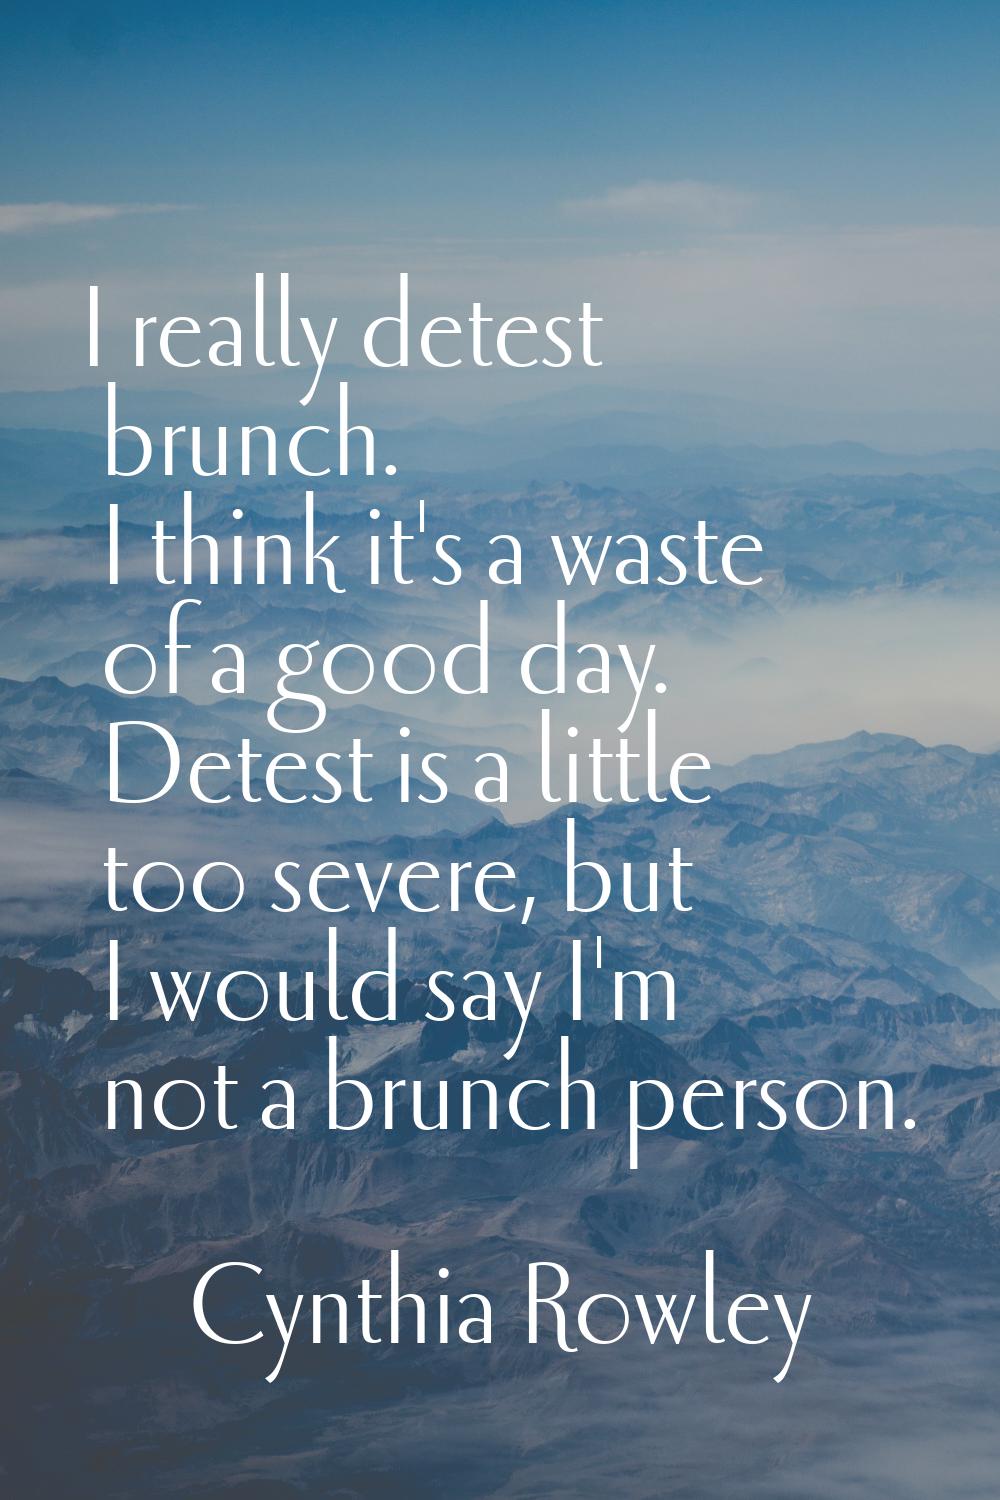 I really detest brunch. I think it's a waste of a good day. Detest is a little too severe, but I wo